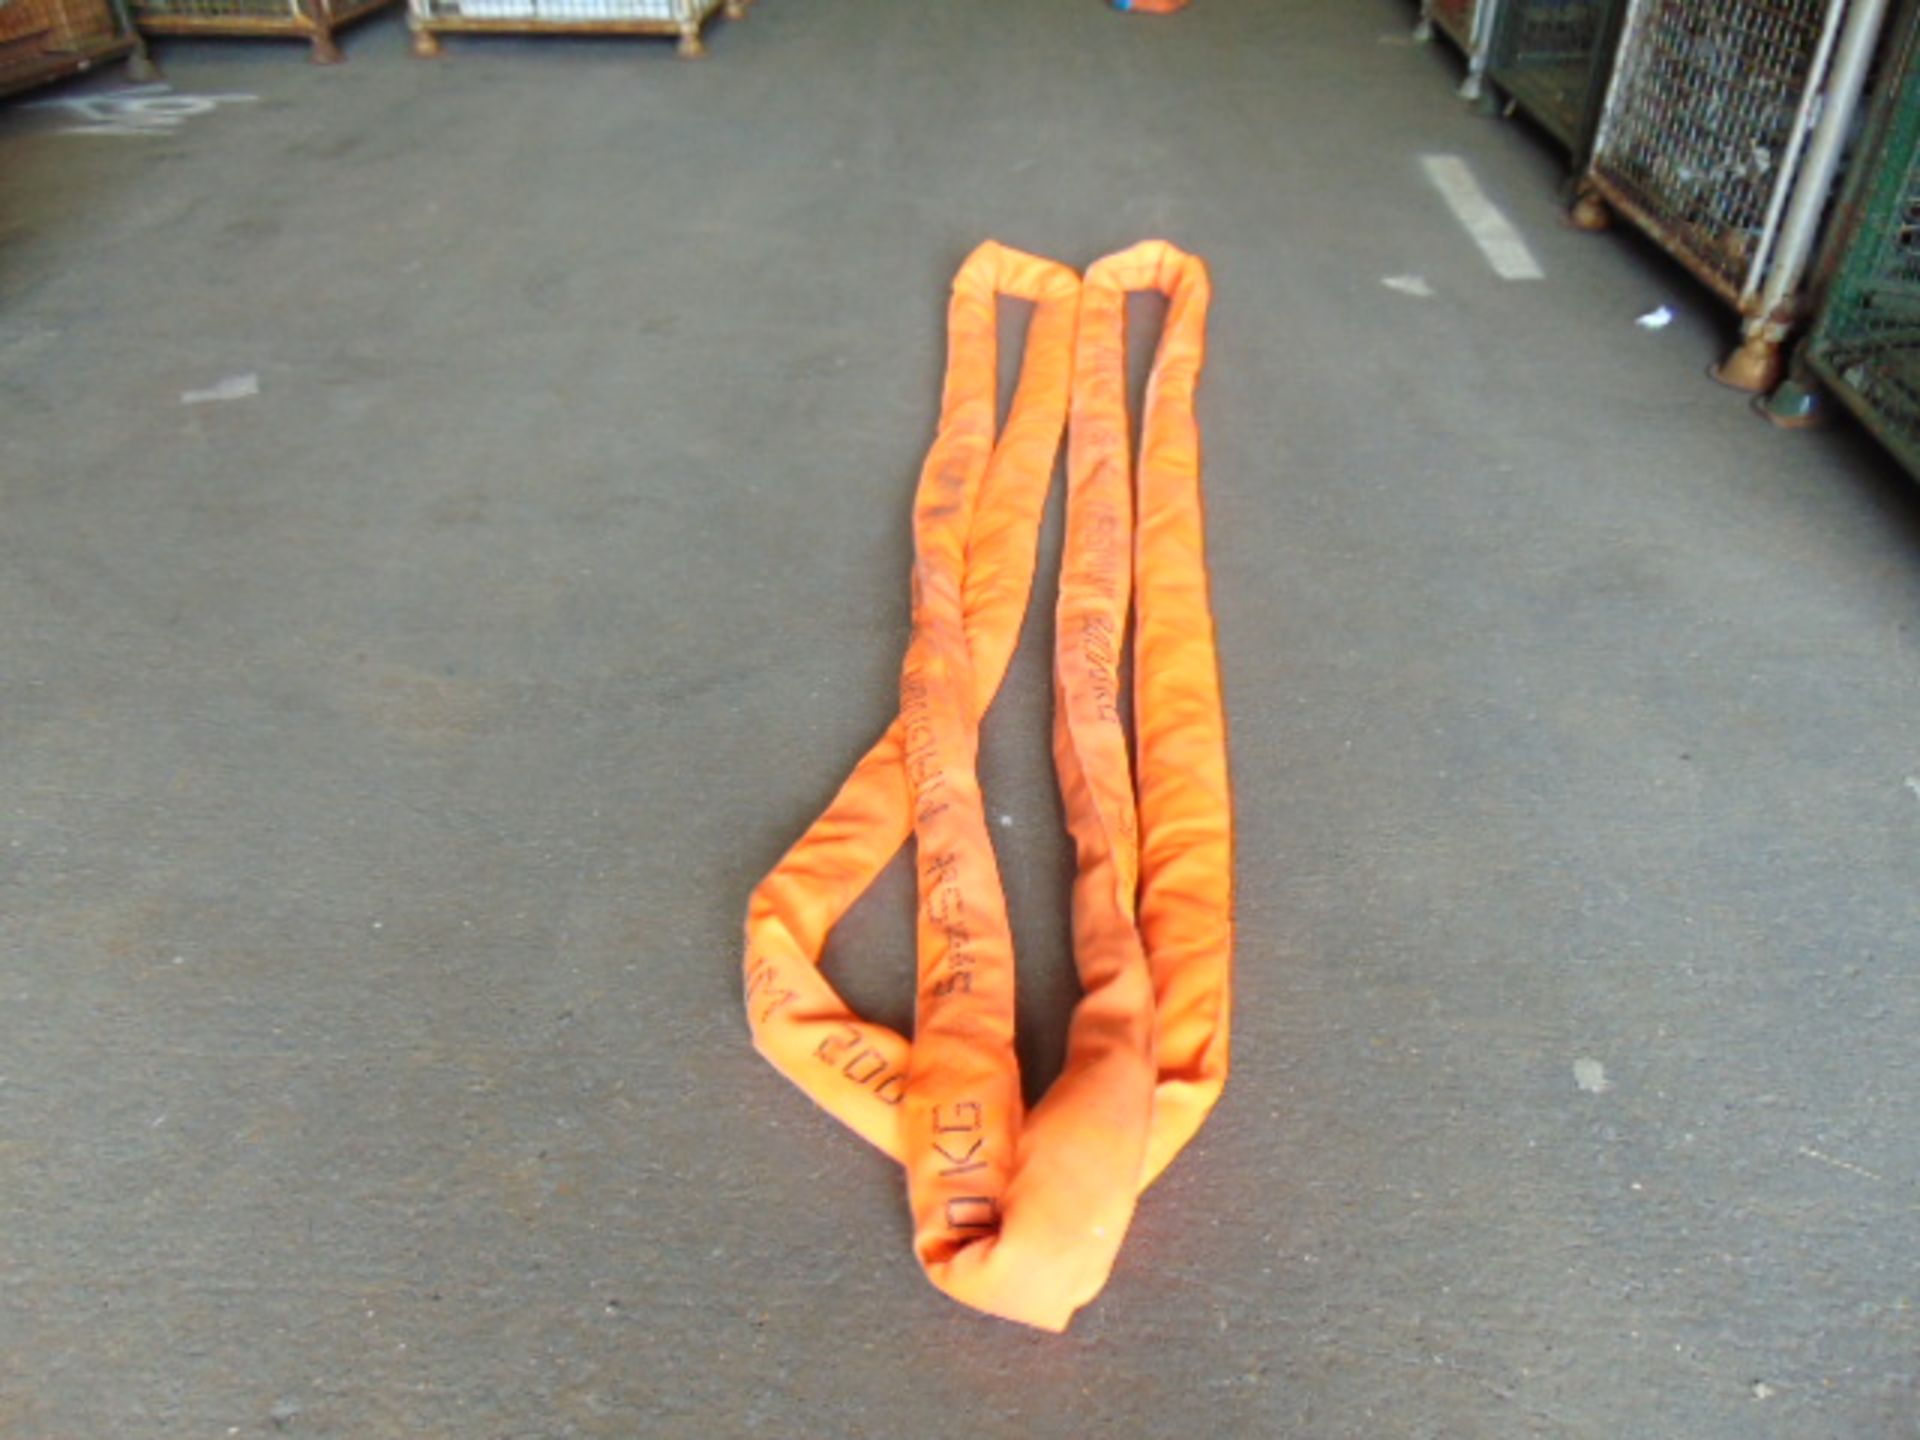 New Unused SpanSet Magnum 20,000kg Lifting/Recovery Strop from MOD - Image 6 of 7